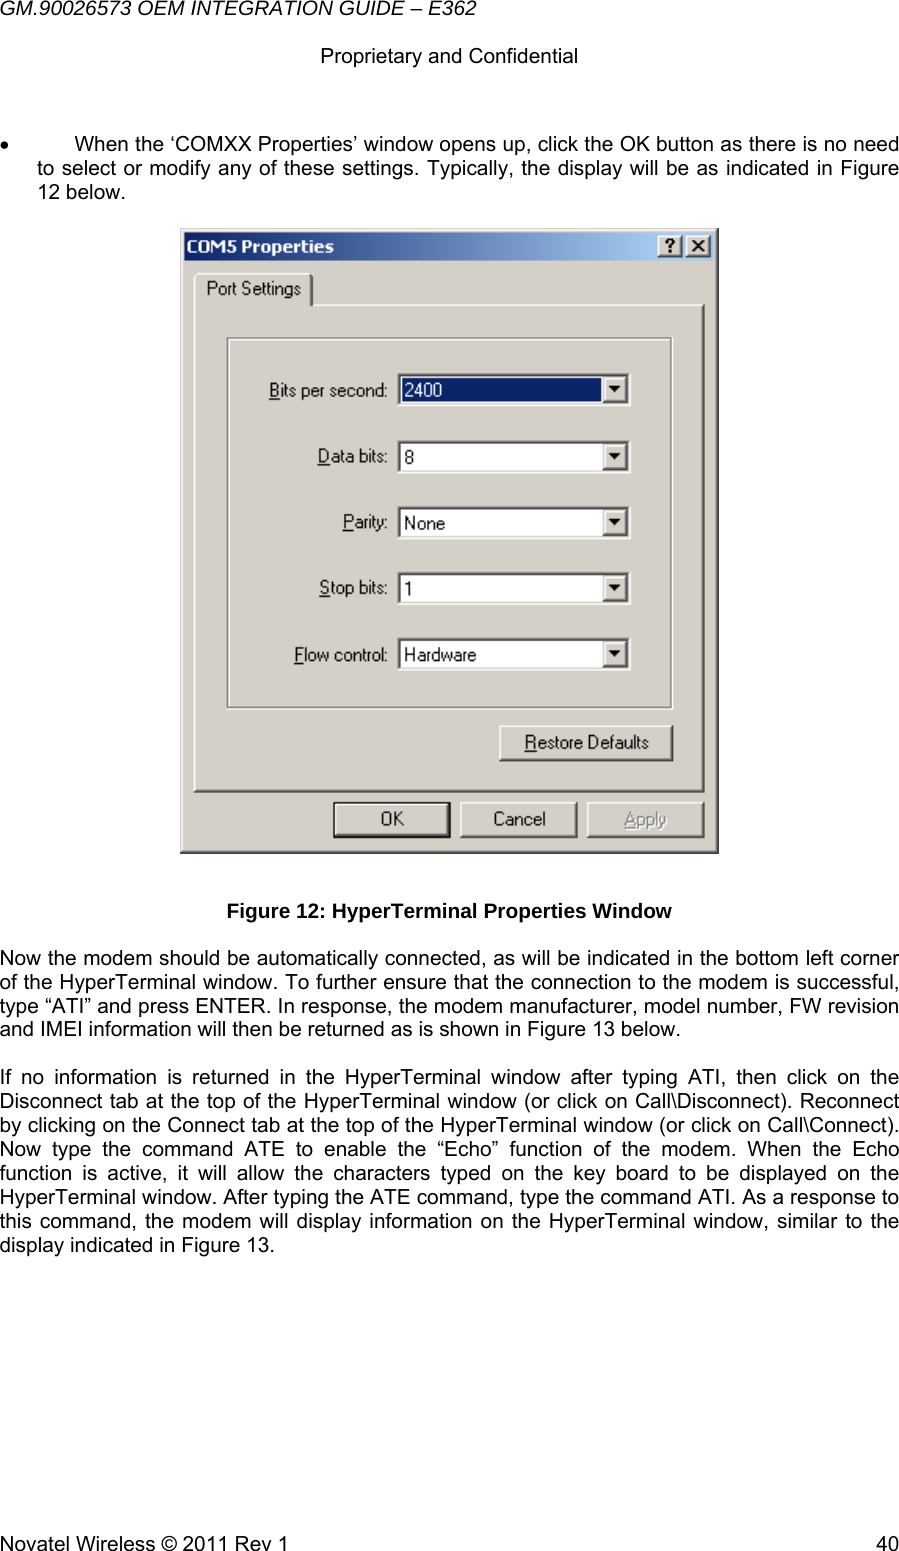 GM.90026573 OEM INTEGRATION GUIDE – E362      Proprietary and Confidential   Novatel Wireless © 2011 Rev 1  40•  When the ‘COMXX Properties’ window opens up, click the OK button as there is no need to select or modify any of these settings. Typically, the display will be as indicated in Figure 12 below.   Figure 12: HyperTerminal Properties Window Now the modem should be automatically connected, as will be indicated in the bottom left corner of the HyperTerminal window. To further ensure that the connection to the modem is successful, type “ATI” and press ENTER. In response, the modem manufacturer, model number, FW revision and IMEI information will then be returned as is shown in Figure 13 below.  If no information is returned in the HyperTerminal window after typing ATI, then click on the Disconnect tab at the top of the HyperTerminal window (or click on Call\Disconnect). Reconnect by clicking on the Connect tab at the top of the HyperTerminal window (or click on Call\Connect). Now type the command ATE to enable the “Echo” function of the modem. When the Echo function is active, it will allow the characters typed on the key board to be displayed on the HyperTerminal window. After typing the ATE command, type the command ATI. As a response to this command, the modem will display information on the HyperTerminal window, similar to the display indicated in Figure 13.  